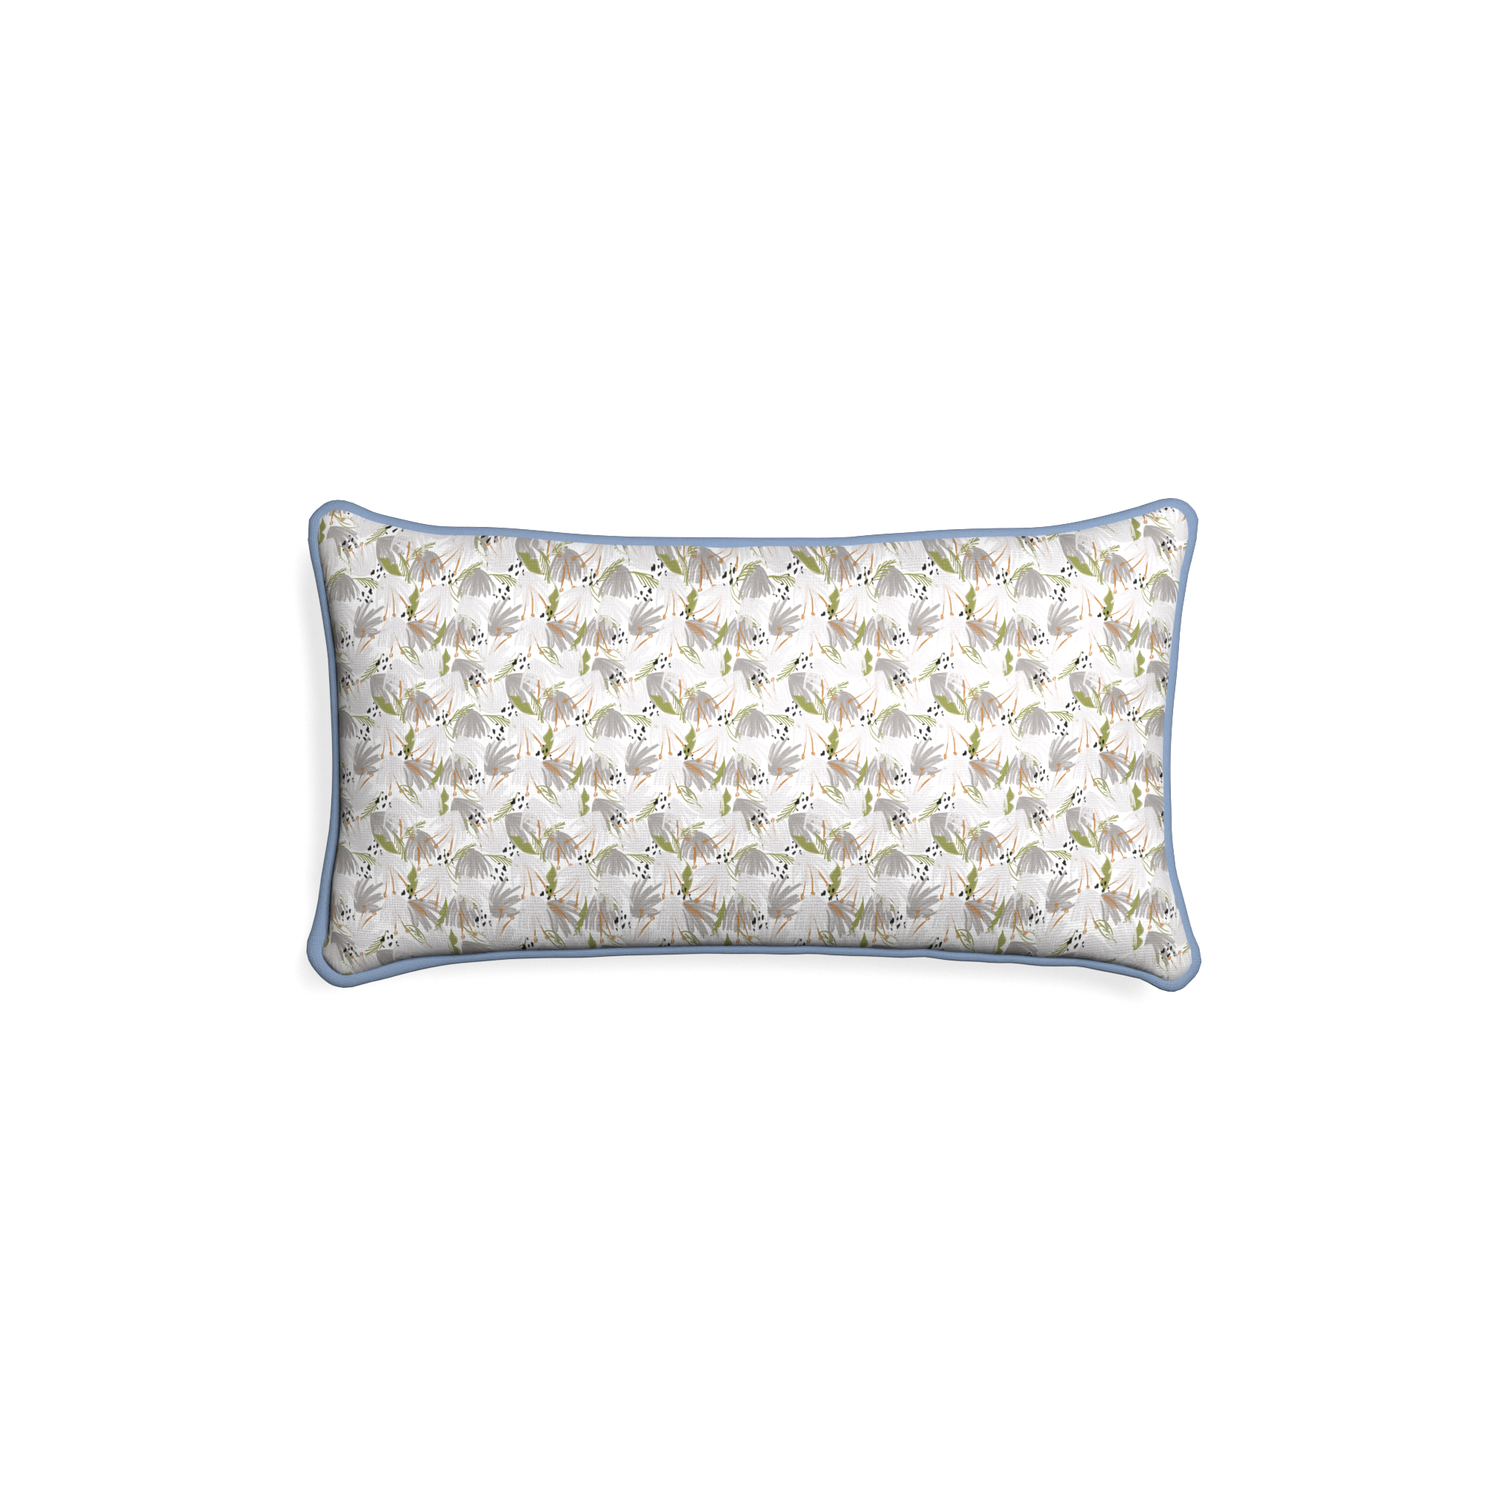 Petite-lumbar eden grey custom grey floralpillow with sky piping on white background